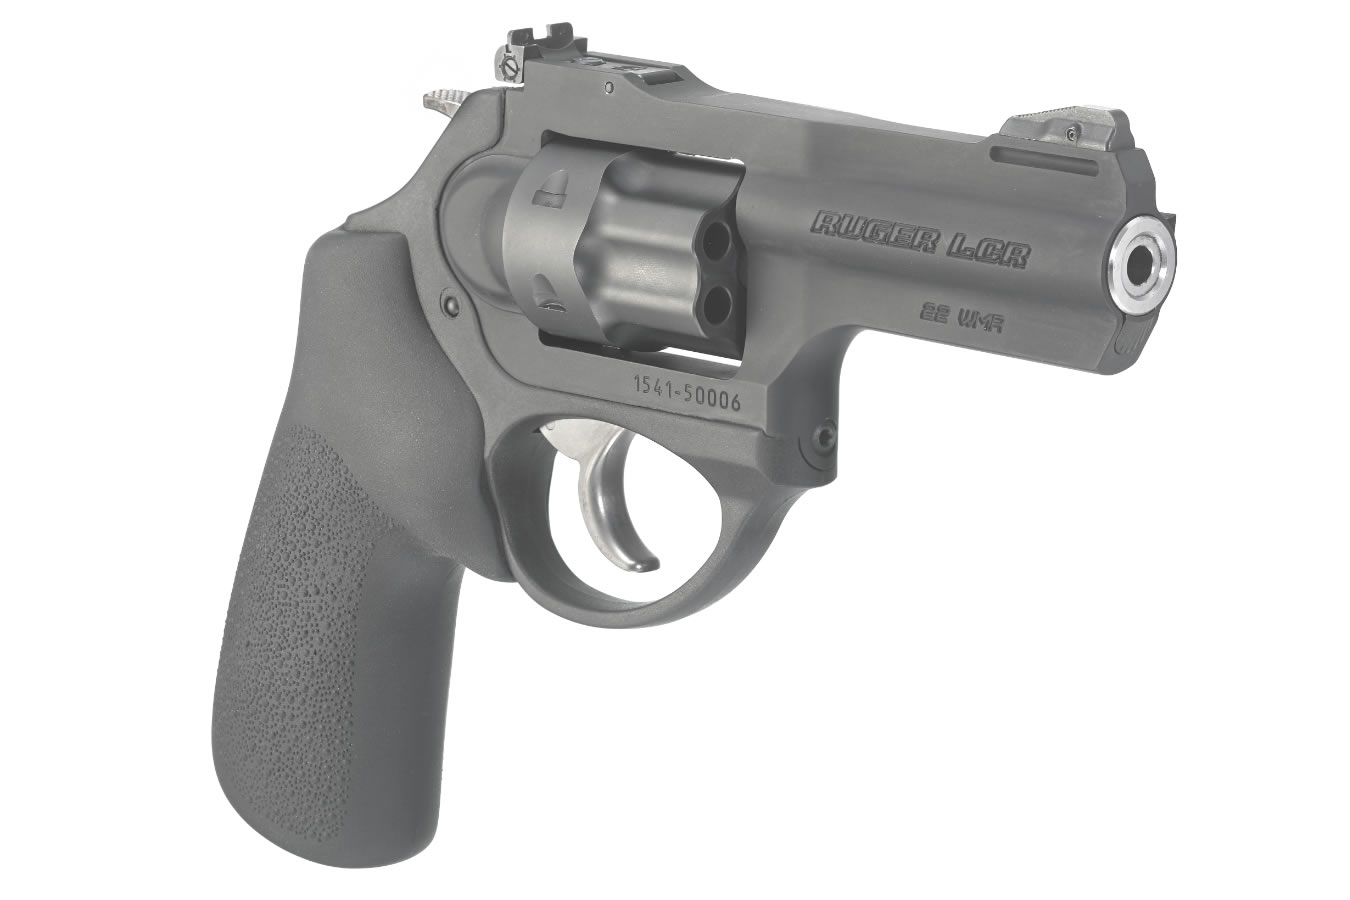 Ruger LCRx 22WMR Double-Action Revolver with 3-Inch Barrel 6 Rnd - $524.99 (Free S/H on Firearms)